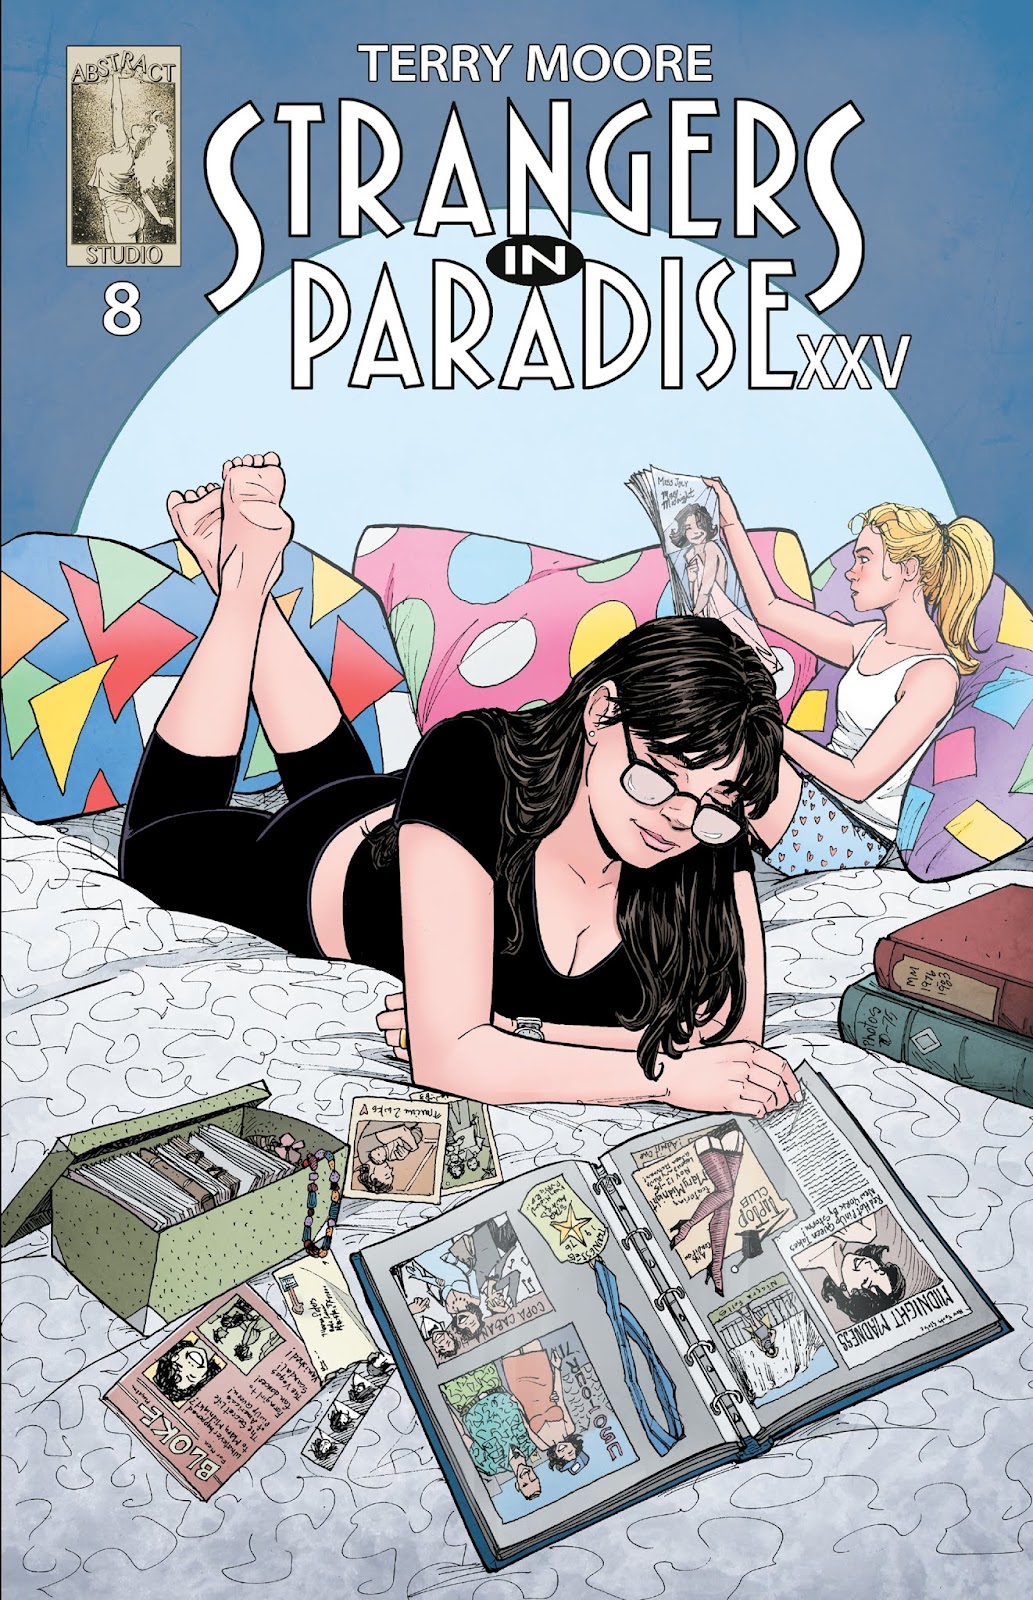 Strangers in Paradise XXV issue 8 - Page 1